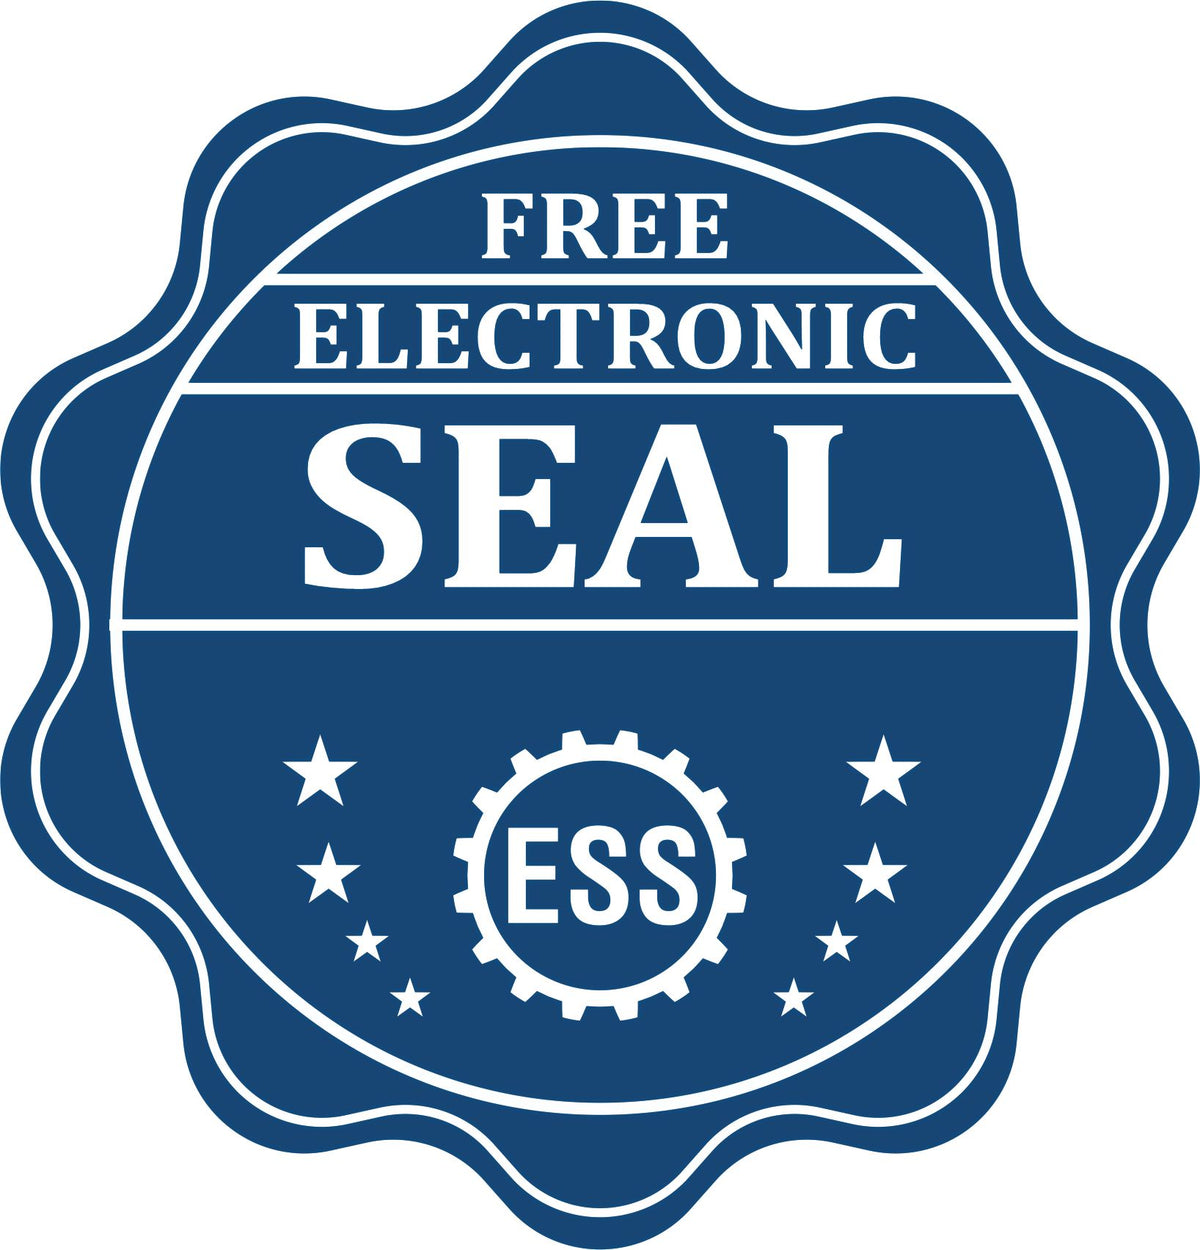 A badge showing a free electronic seal for the Slim Pre-Inked Wisconsin Landscape Architect Seal Stamp with stars and the ESS gear on the emblem.